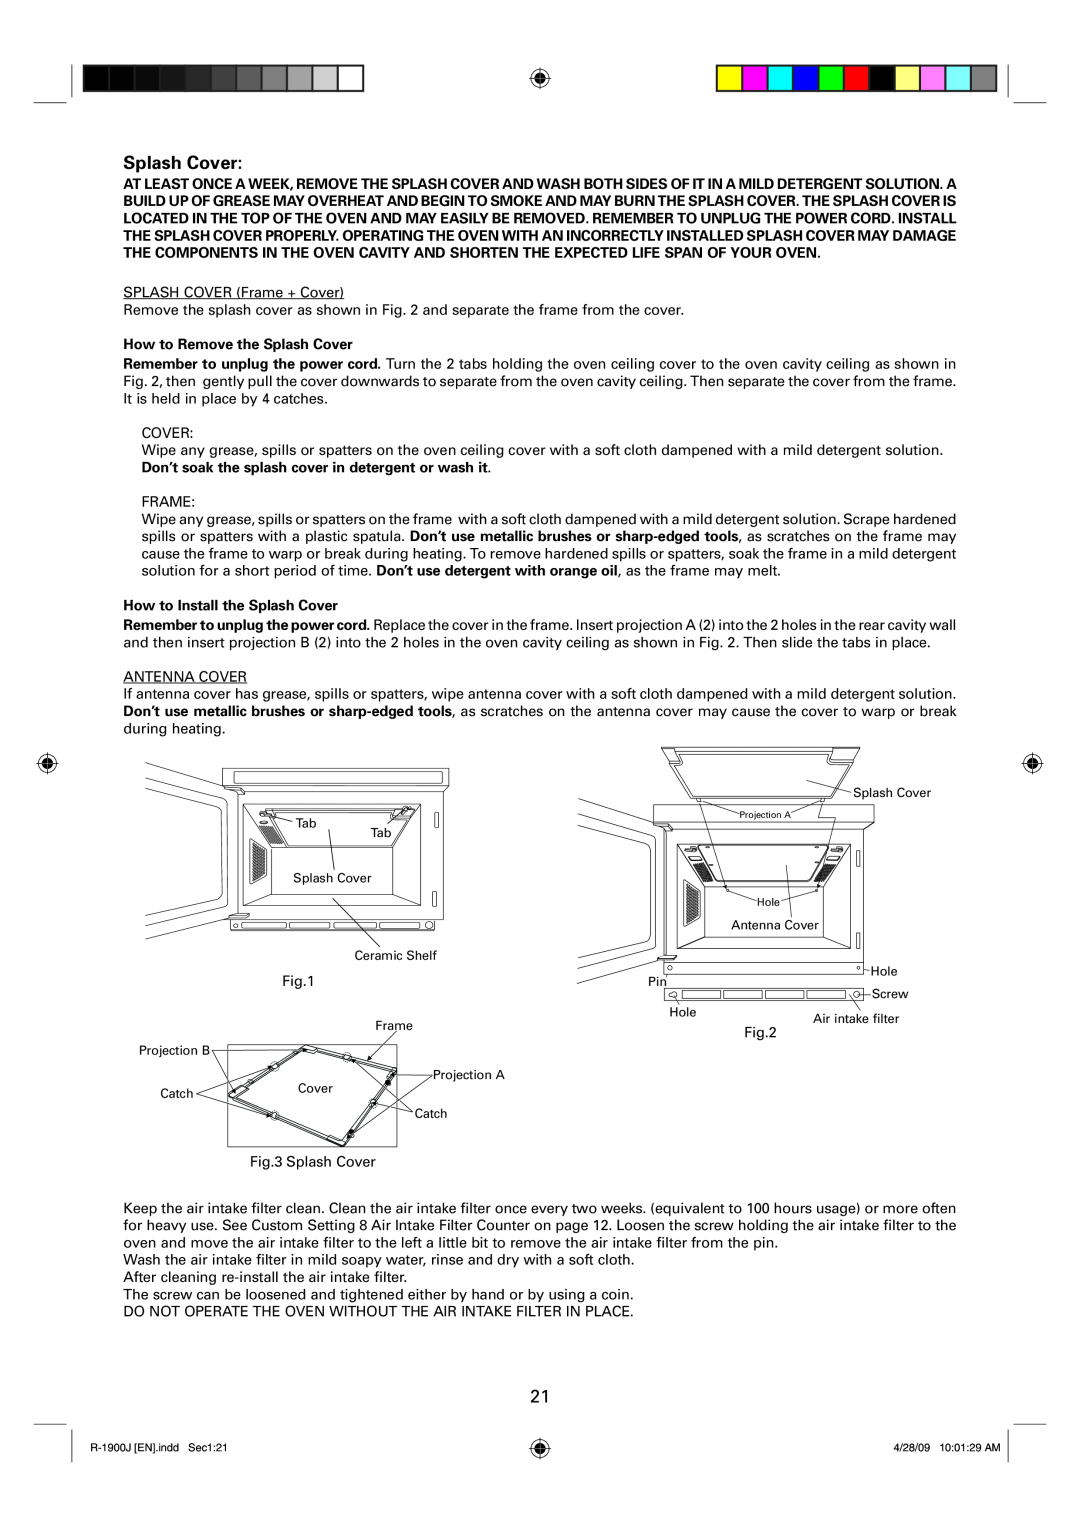 Sharp R-1900J operation manual How to Remove the Splash Cover, How to Install the Splash Cover 